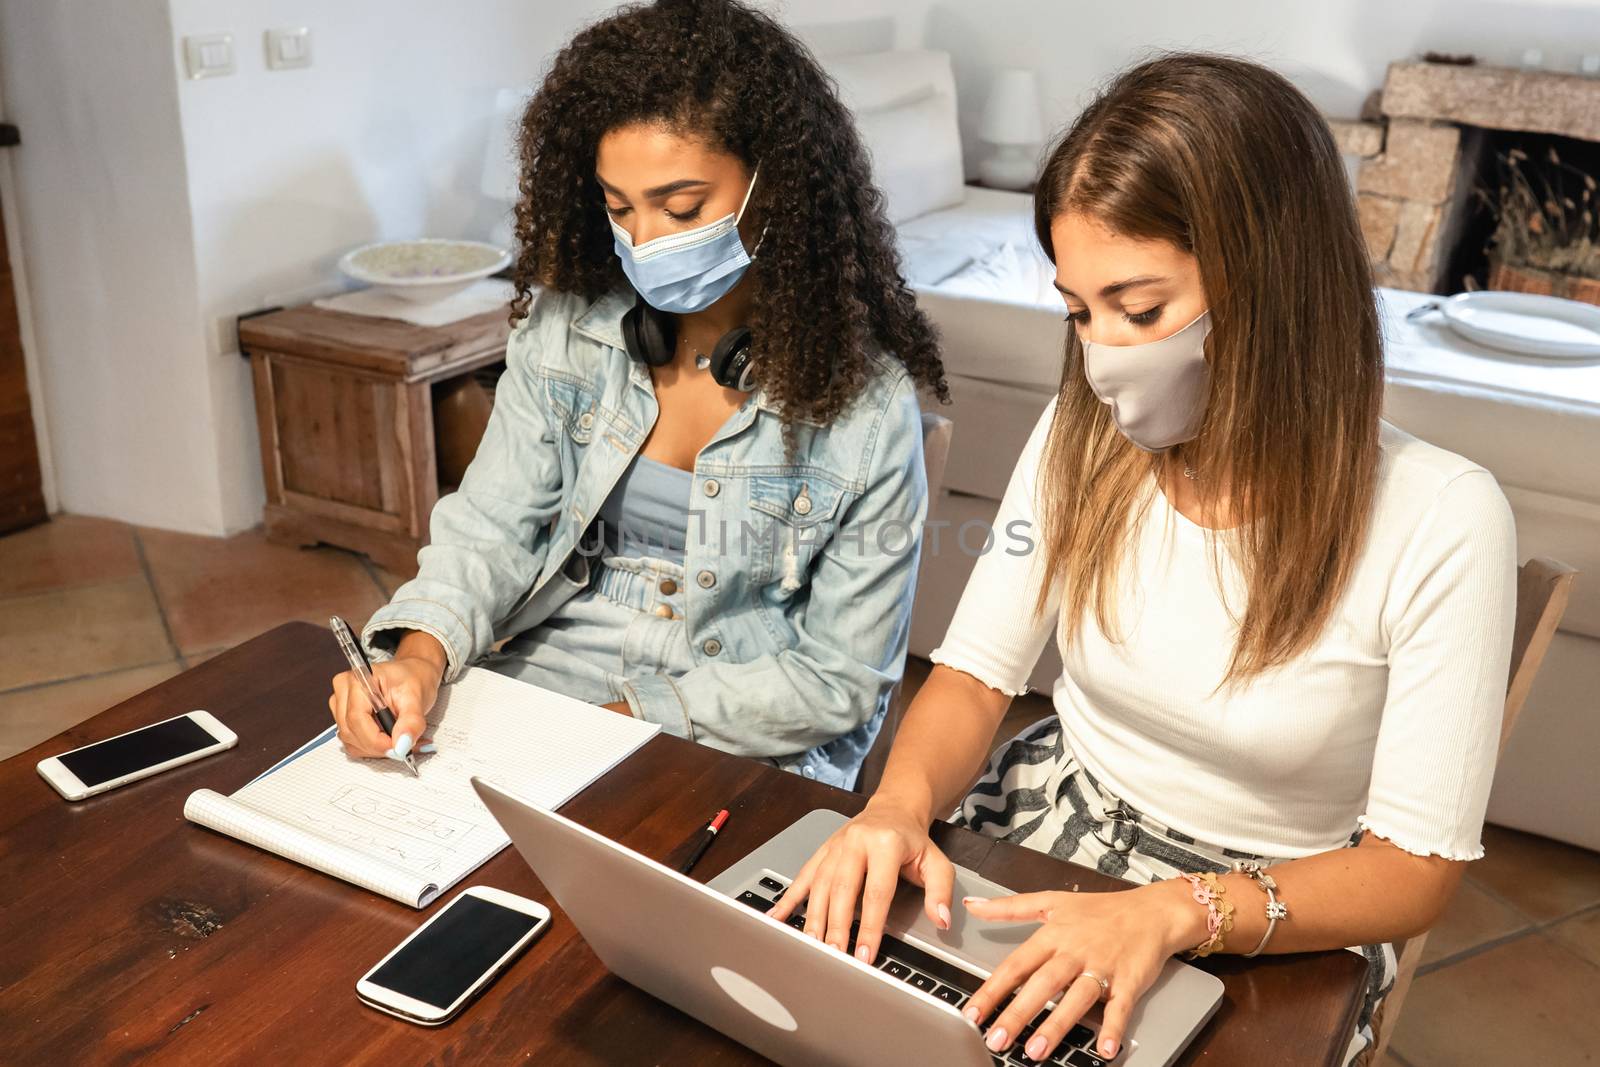 Lifestyle concept, work from home to reinvent your life: two young women, hispanic and caucasian, sitting on a table using a laptop with medical mask protection - New normal job activity